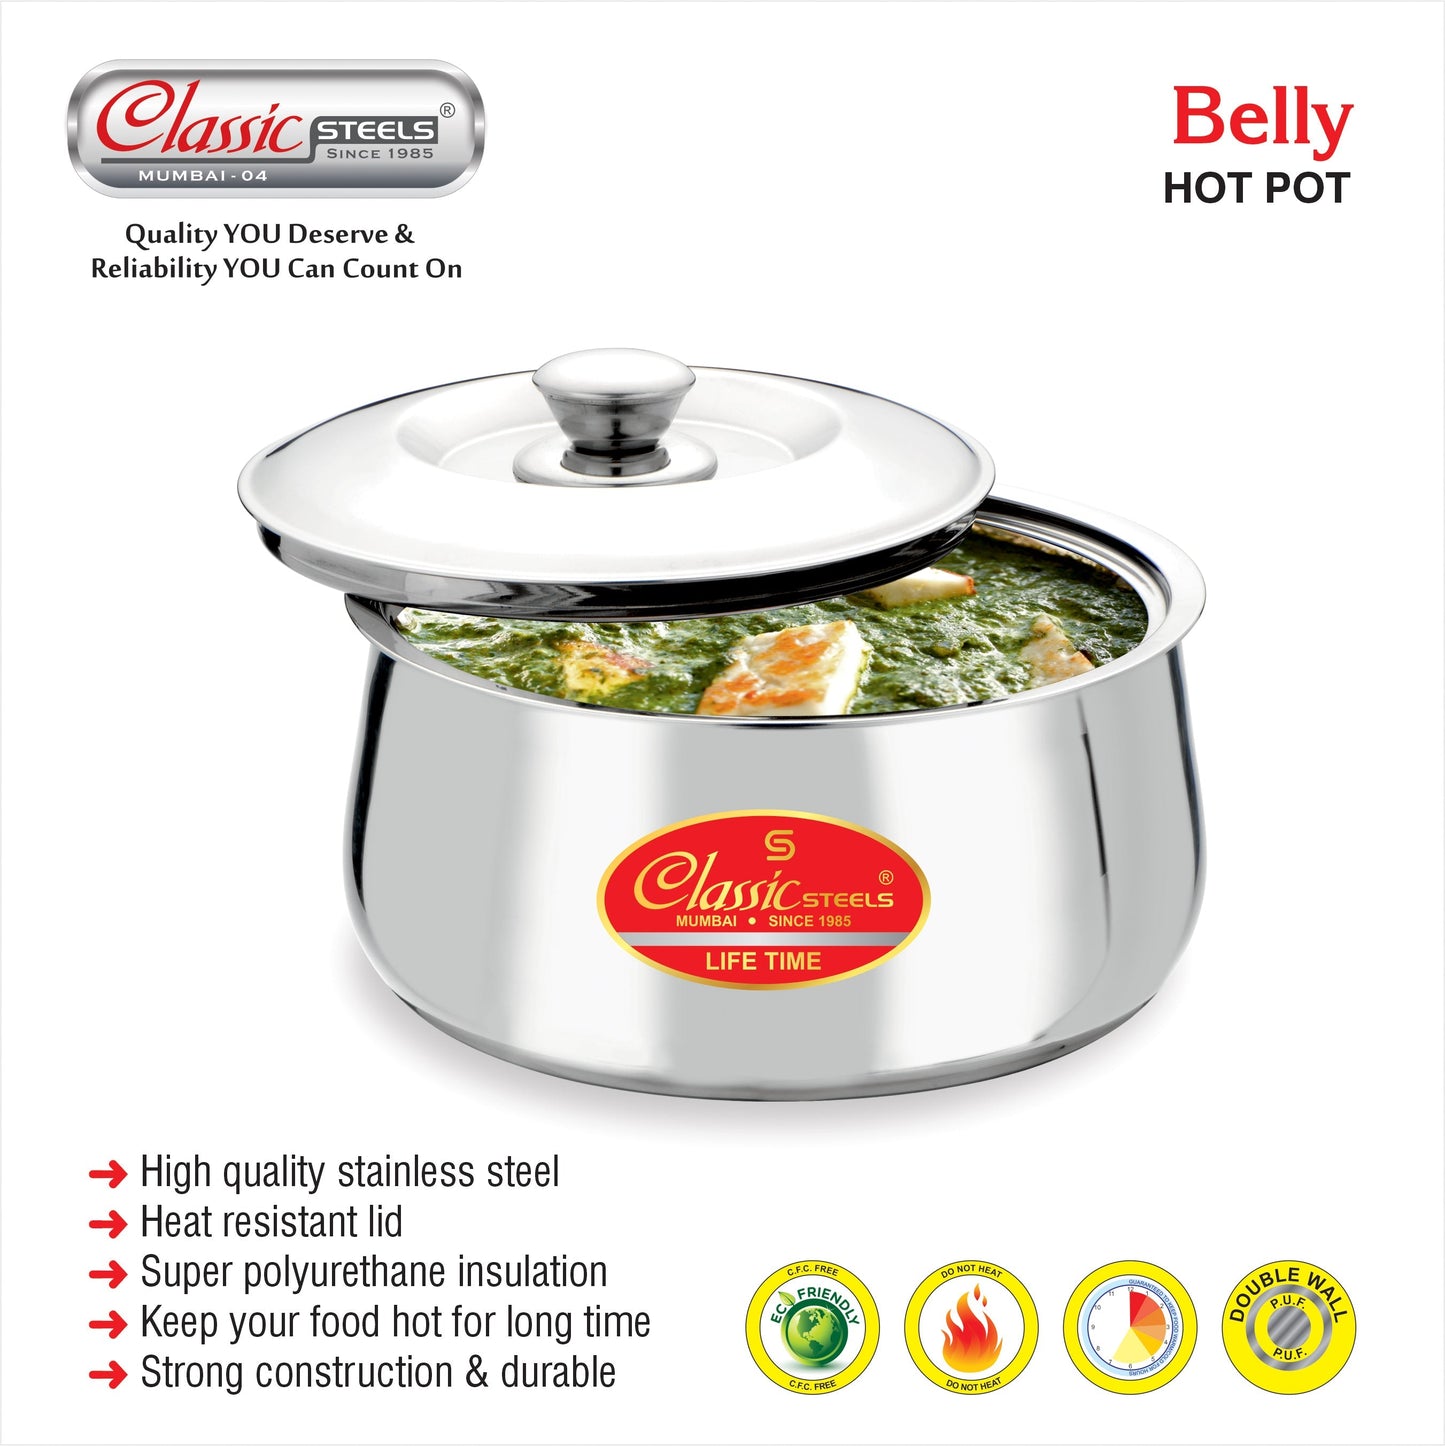 Evergreen Belly : Insulated Stainless Steel Hot Pot